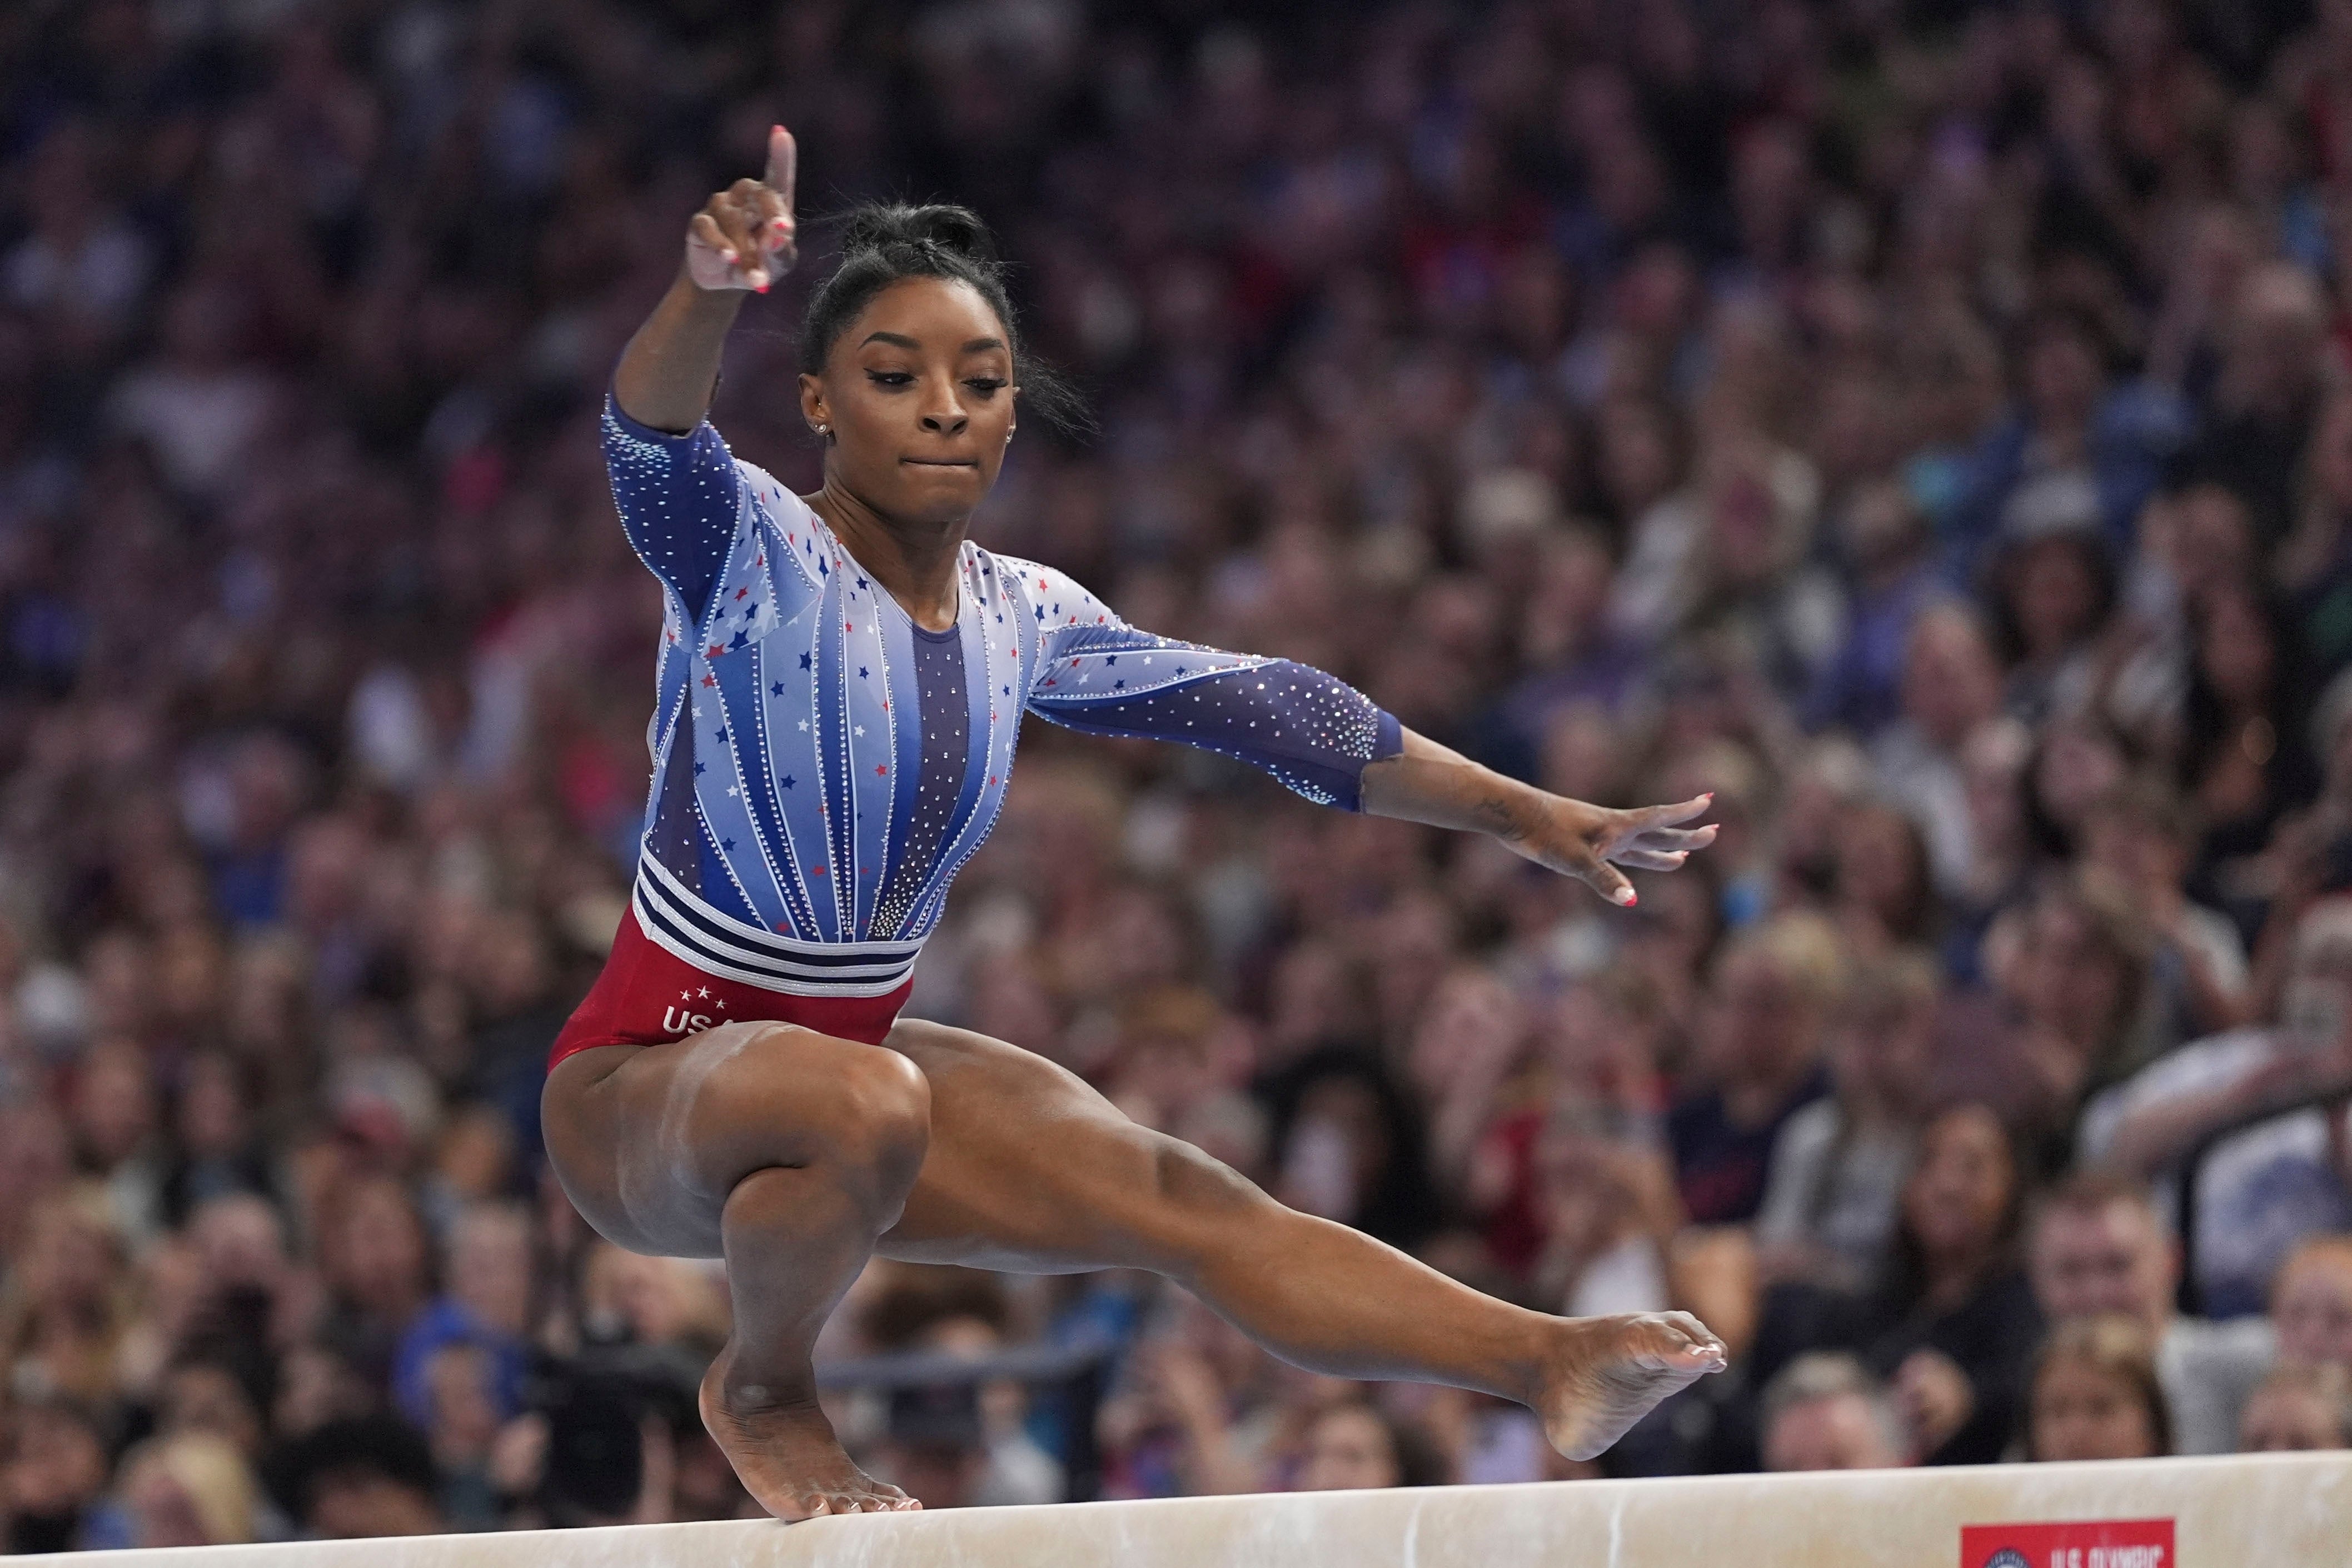 simone biles, taylor swift, gymnast, olympics, paris 2024, minneapolis, minnesota, u.s., singer, taylor swift reacts to simone biles using her song ‘ready for it’ in olympics trial floor routine